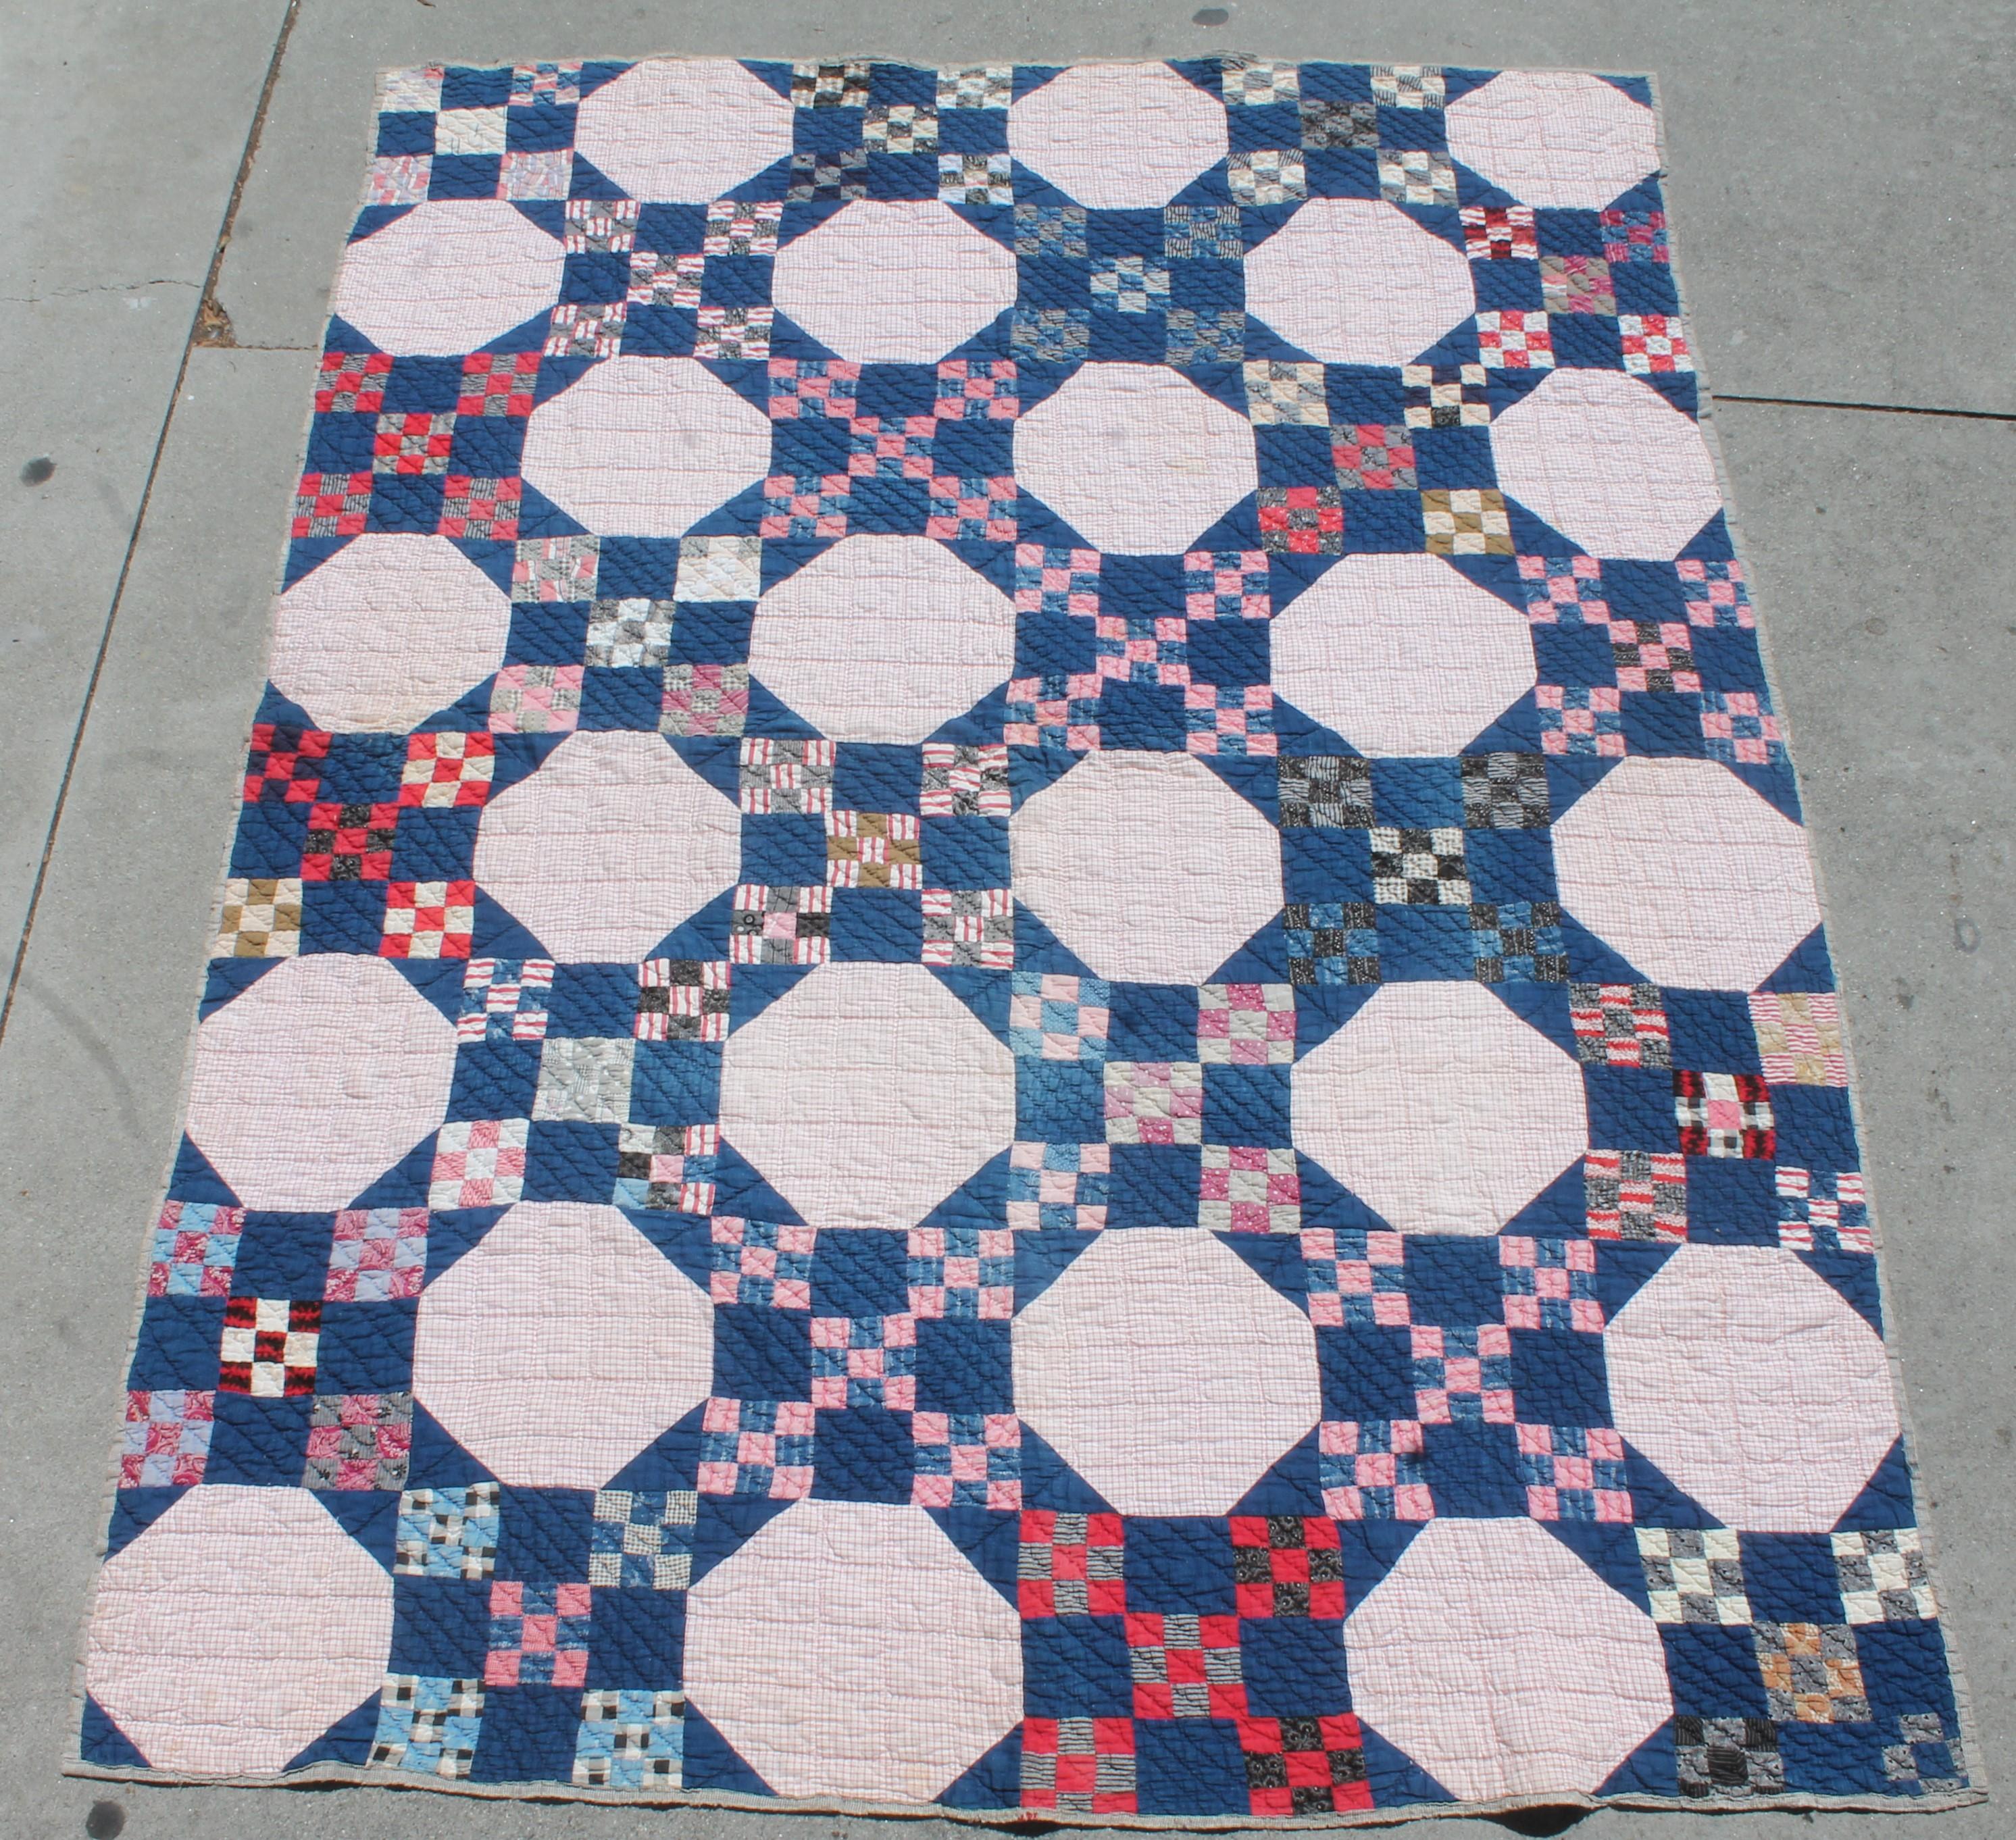 This early red, white and blue calico and indigo blue fabrics has a homespun backing. The binding edges have been repaired in some areas a long time ago. The quilts is in good condition otherwise.